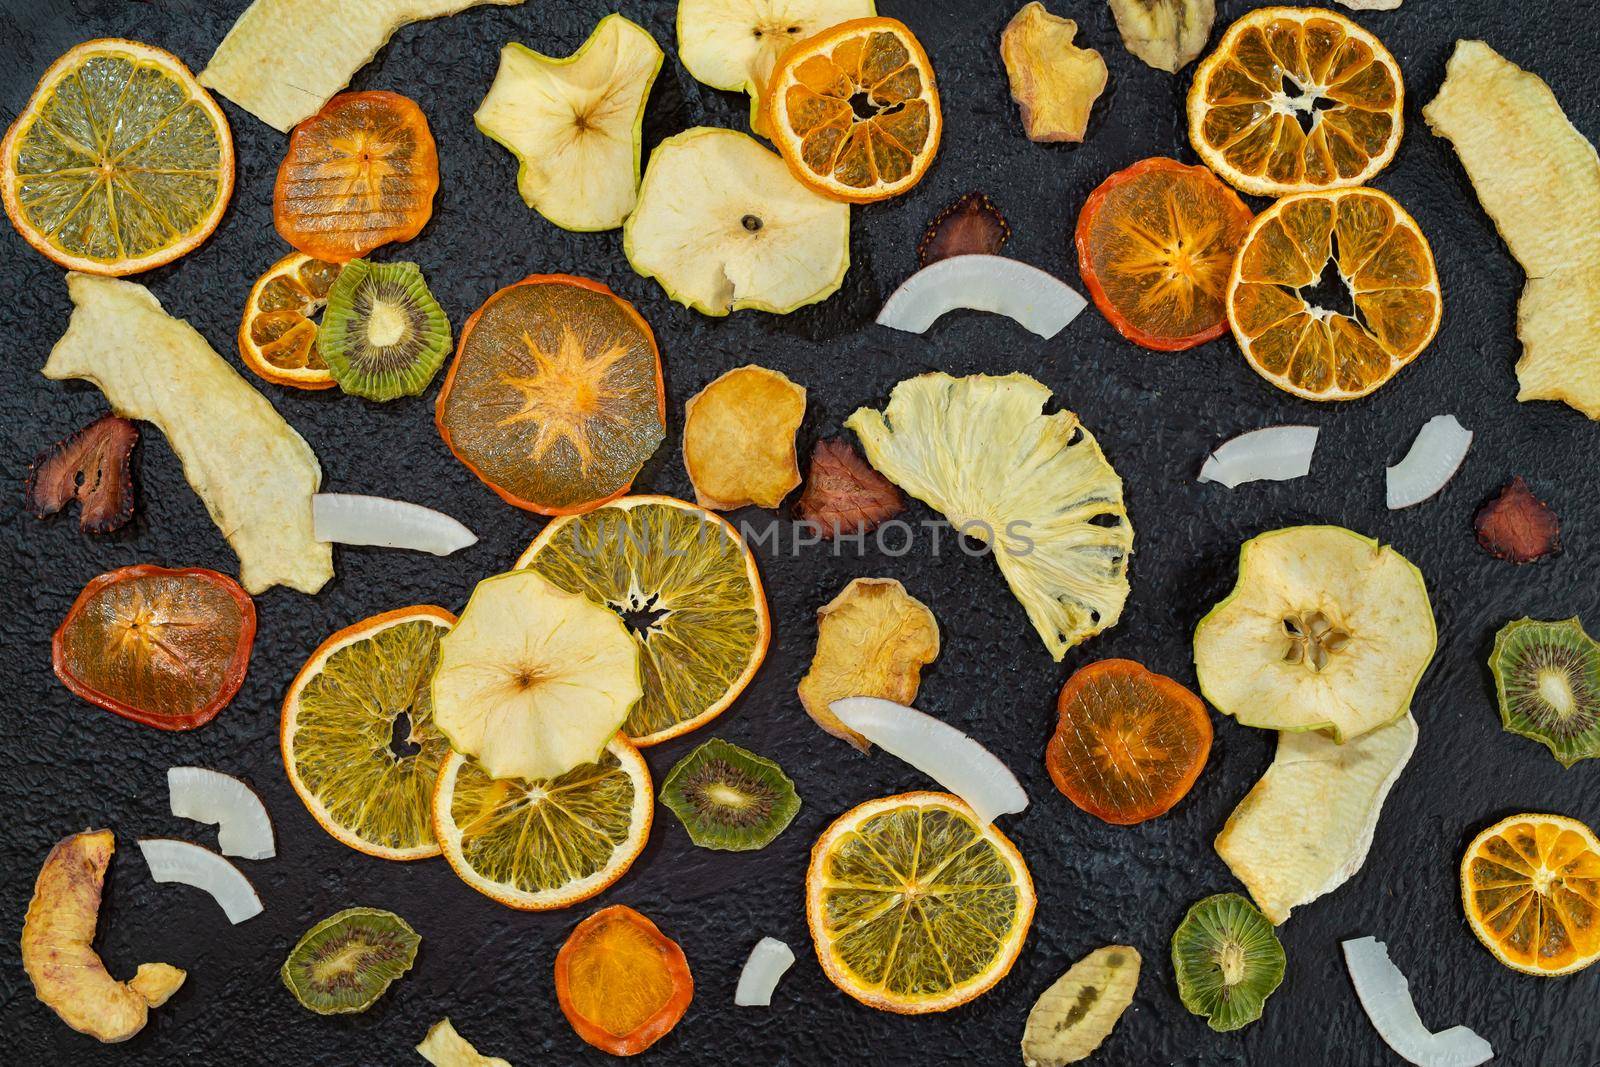 Organic Healthy Assorted Dried Fruit Close-up. Snacks from fraps: apple, pear, orange, banana, persimmon, coconut pineapple strawberry